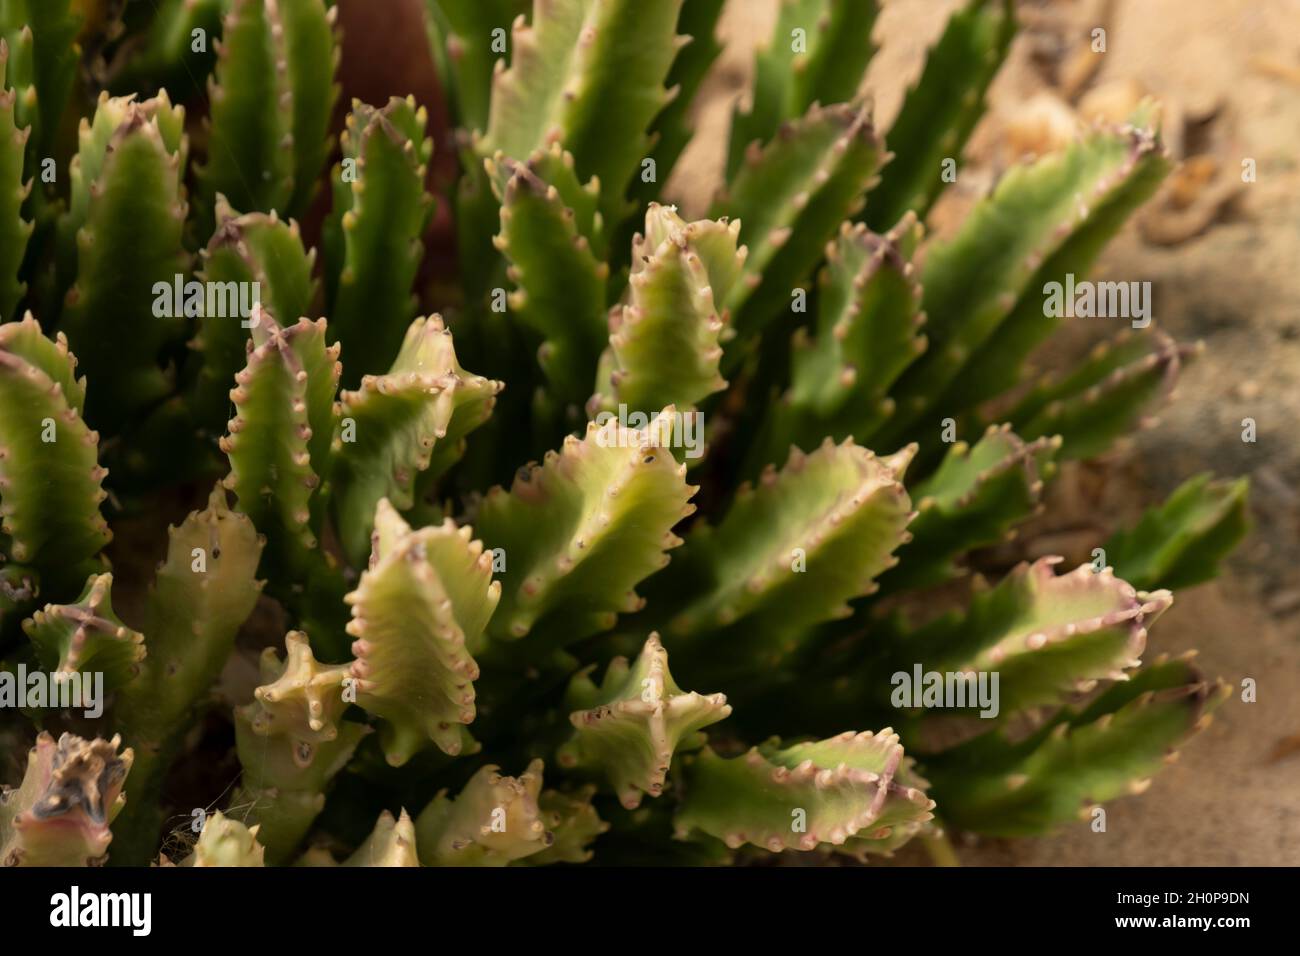 Stems of Stapelia hirsuta, common name starfish flower or carrion plant, a species of flowering plant belonging to the family Apocynaceae endemic to South Africa and southern Namibia Stock Photo